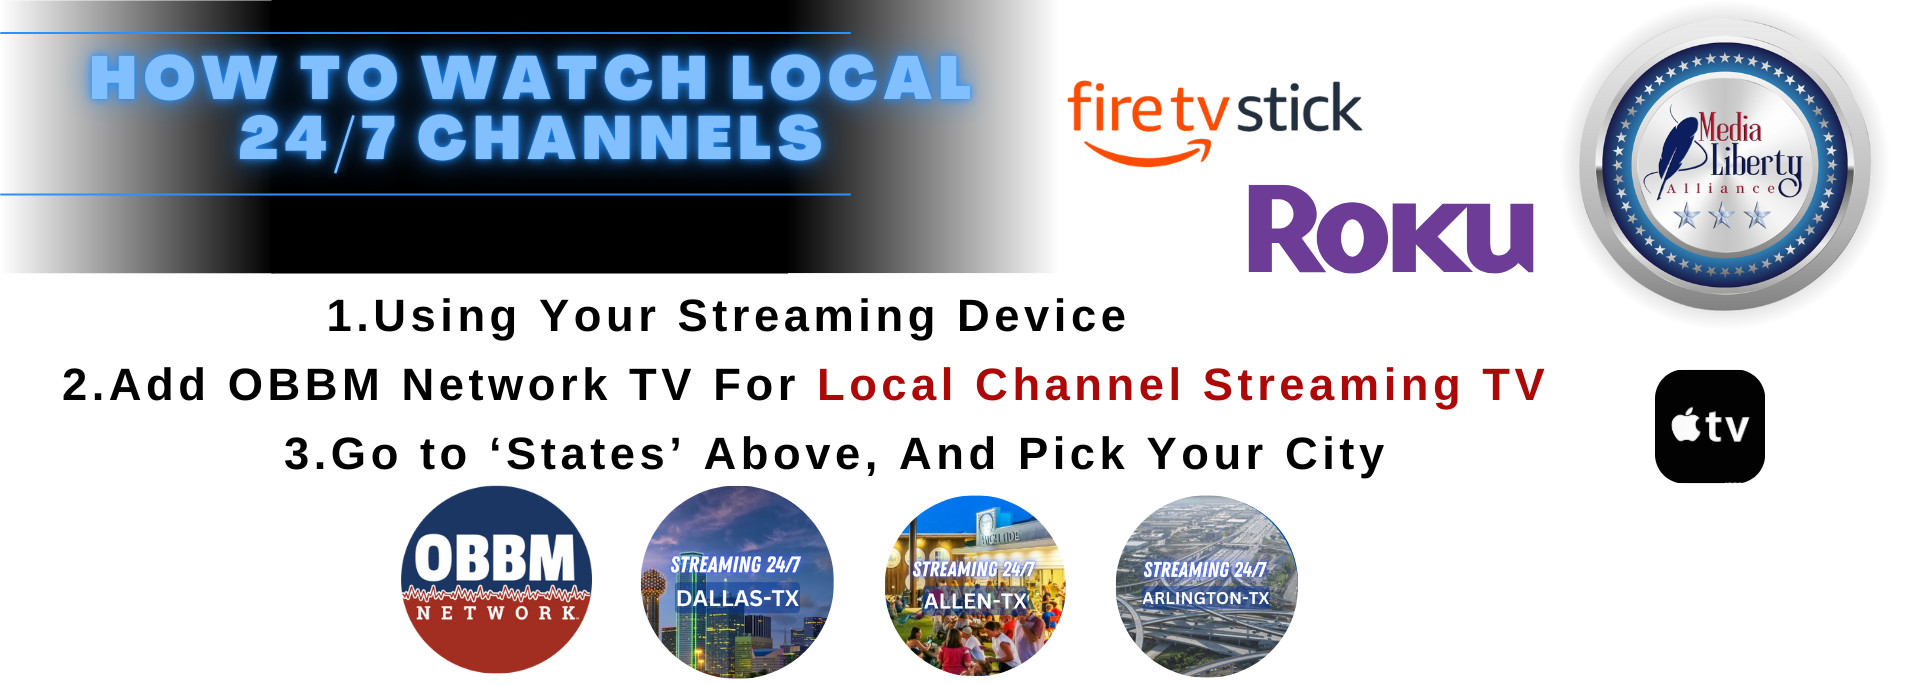 How to Watch Local 24/7 Streaming Channels